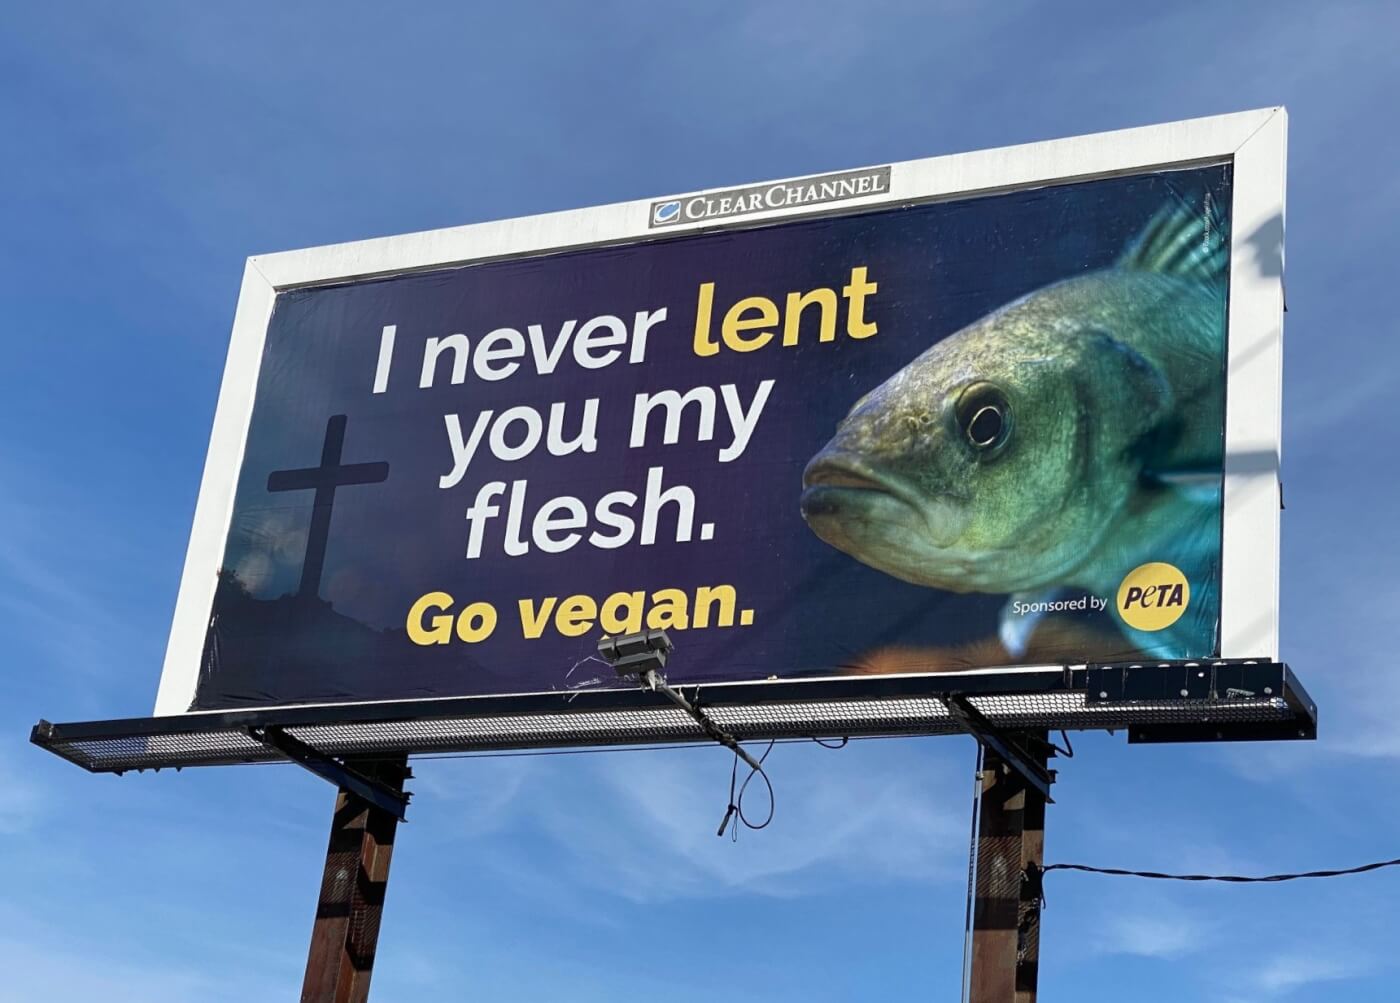 large sign against blue sky with a cross, a fish, and a slogan that says 'I never lent you my flesh. Go vegan.'